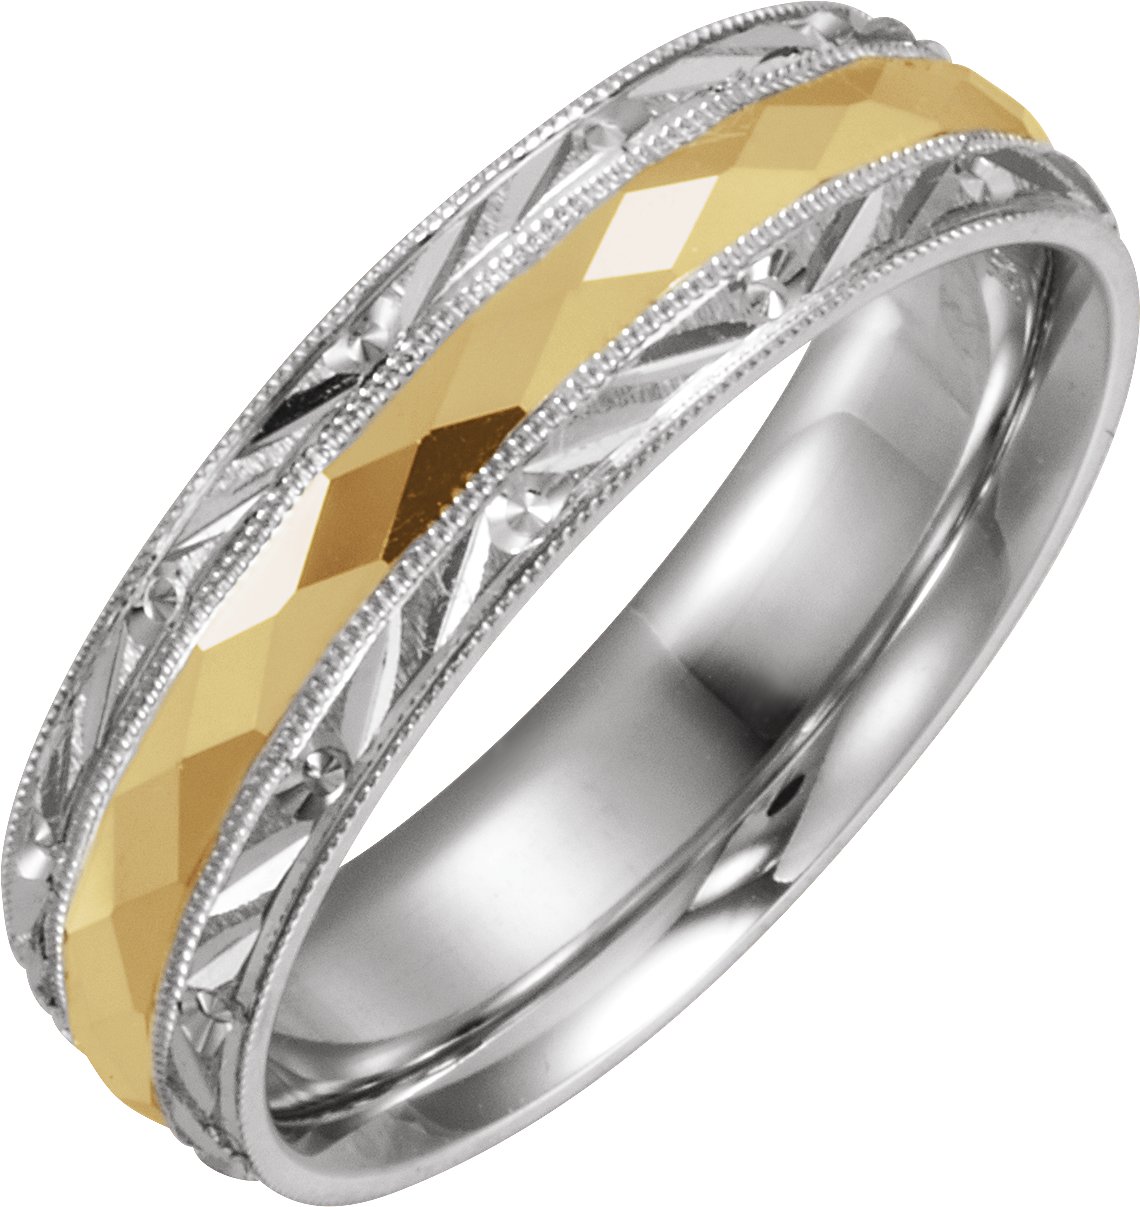 14K White/Yellow 6 mm Design-Engraved Band with Milgrain Size 8